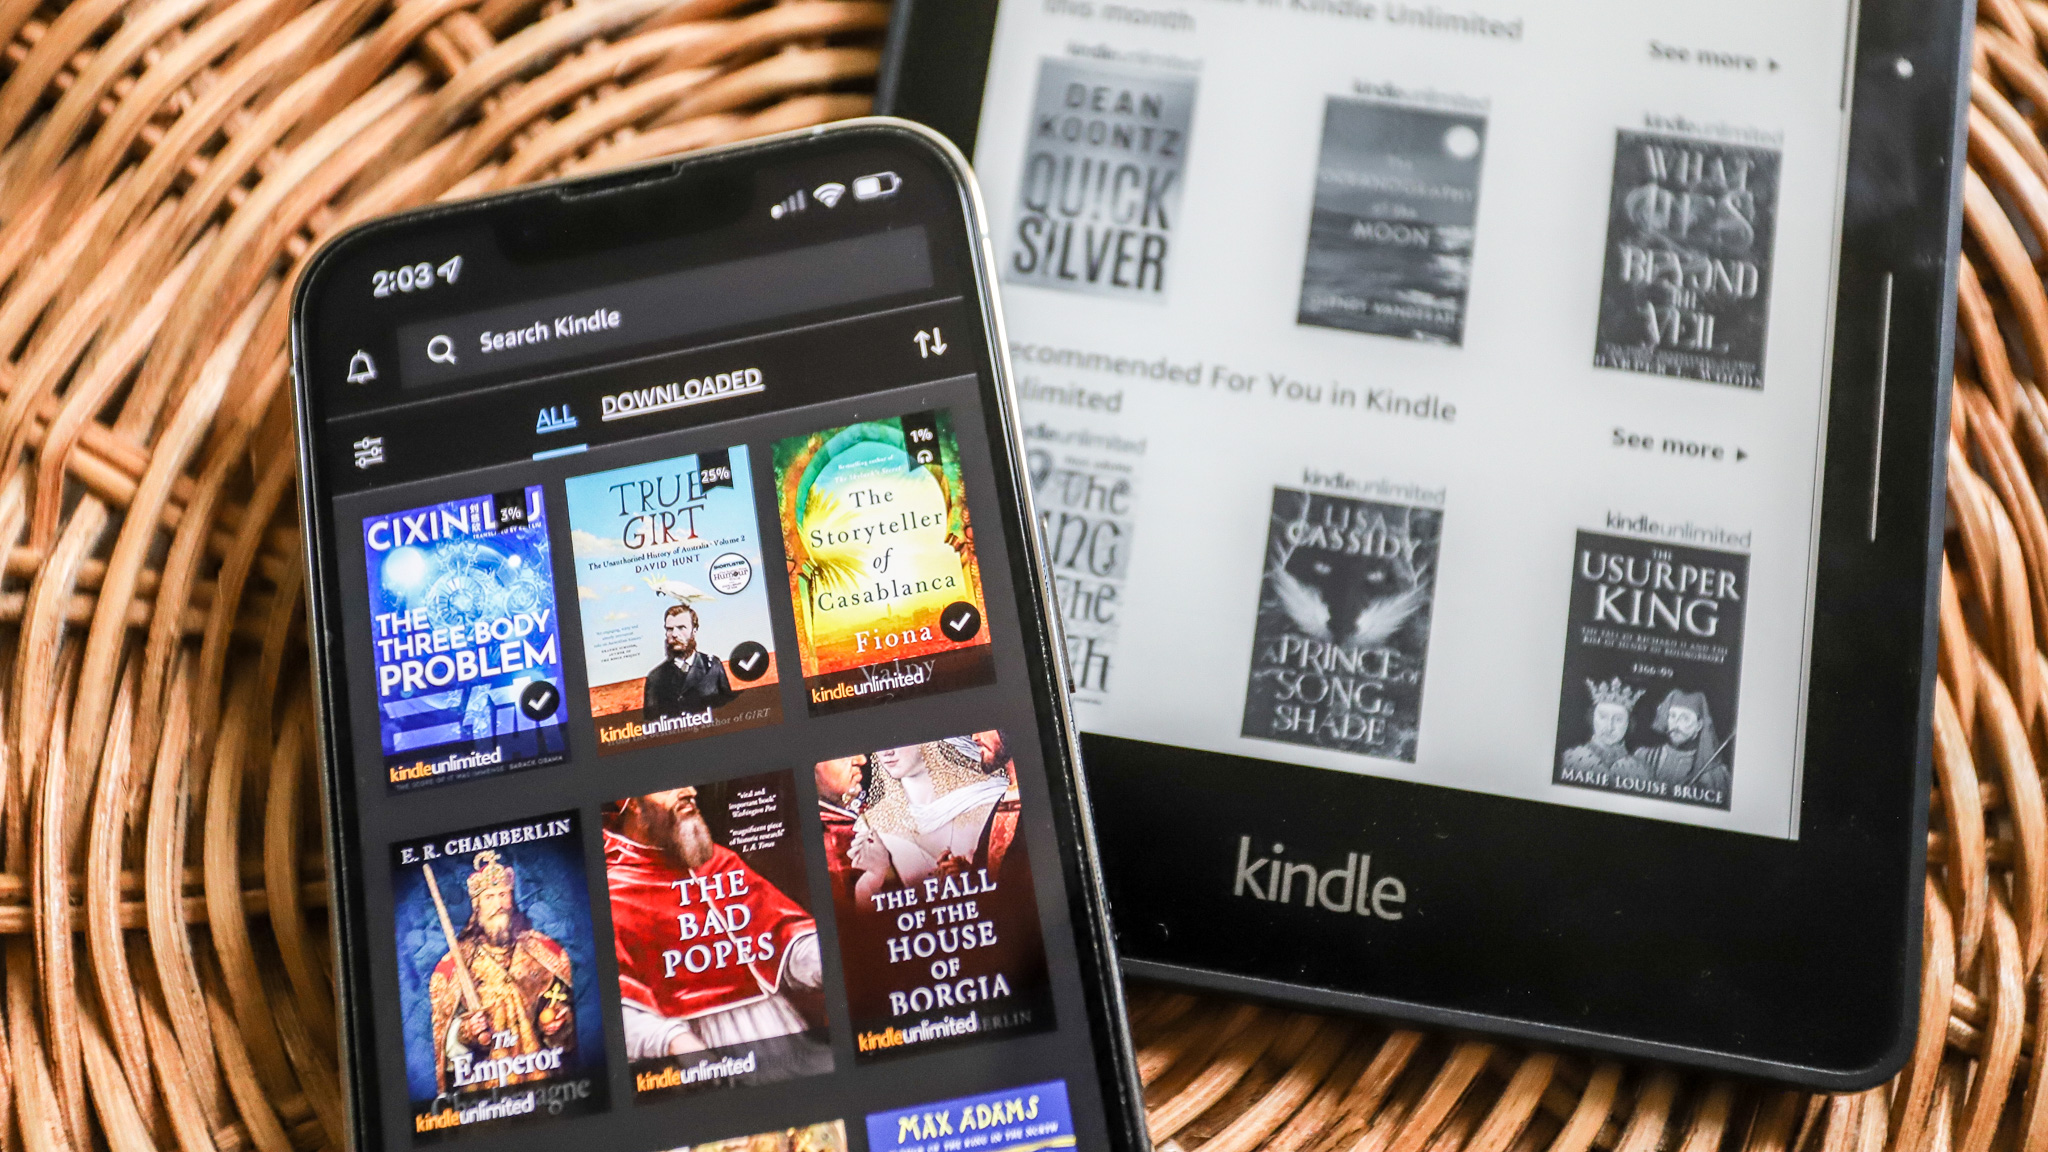 Kindle Unlimited: Everything you need to know